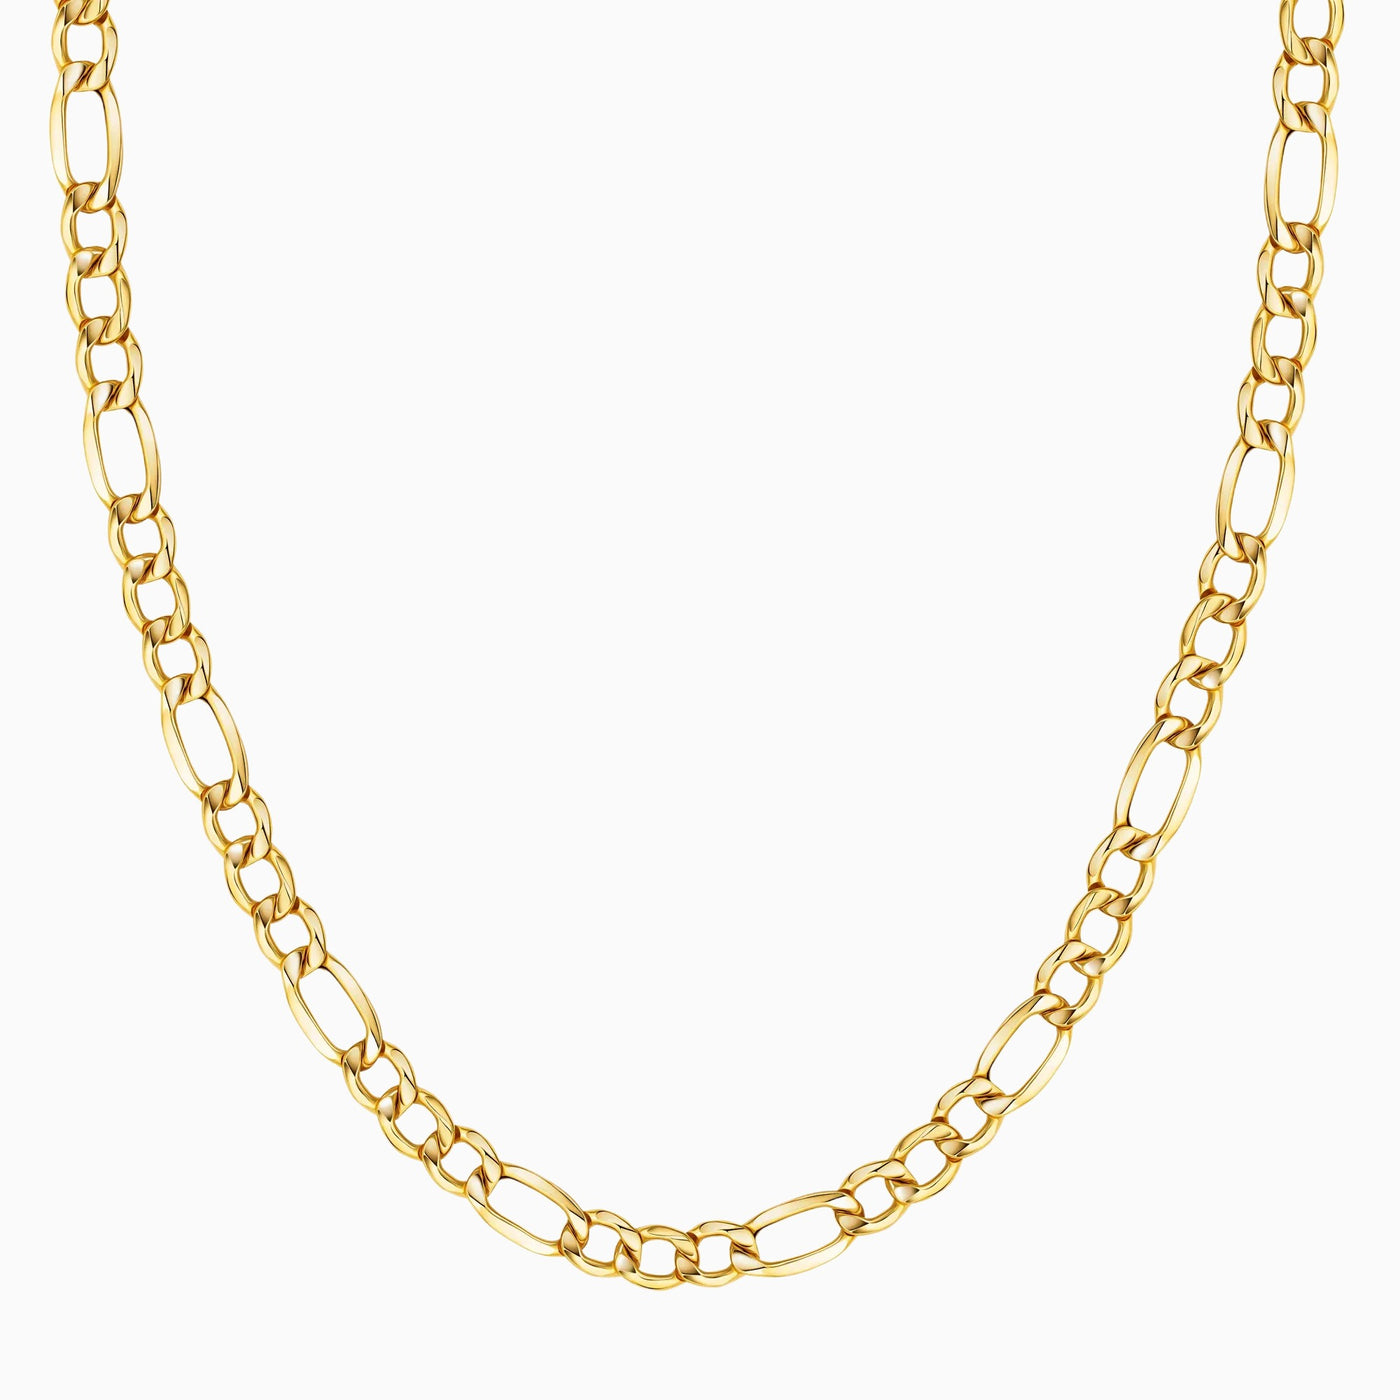 10K Gold 5MM Figaro 3+1 Link Chain Necklace